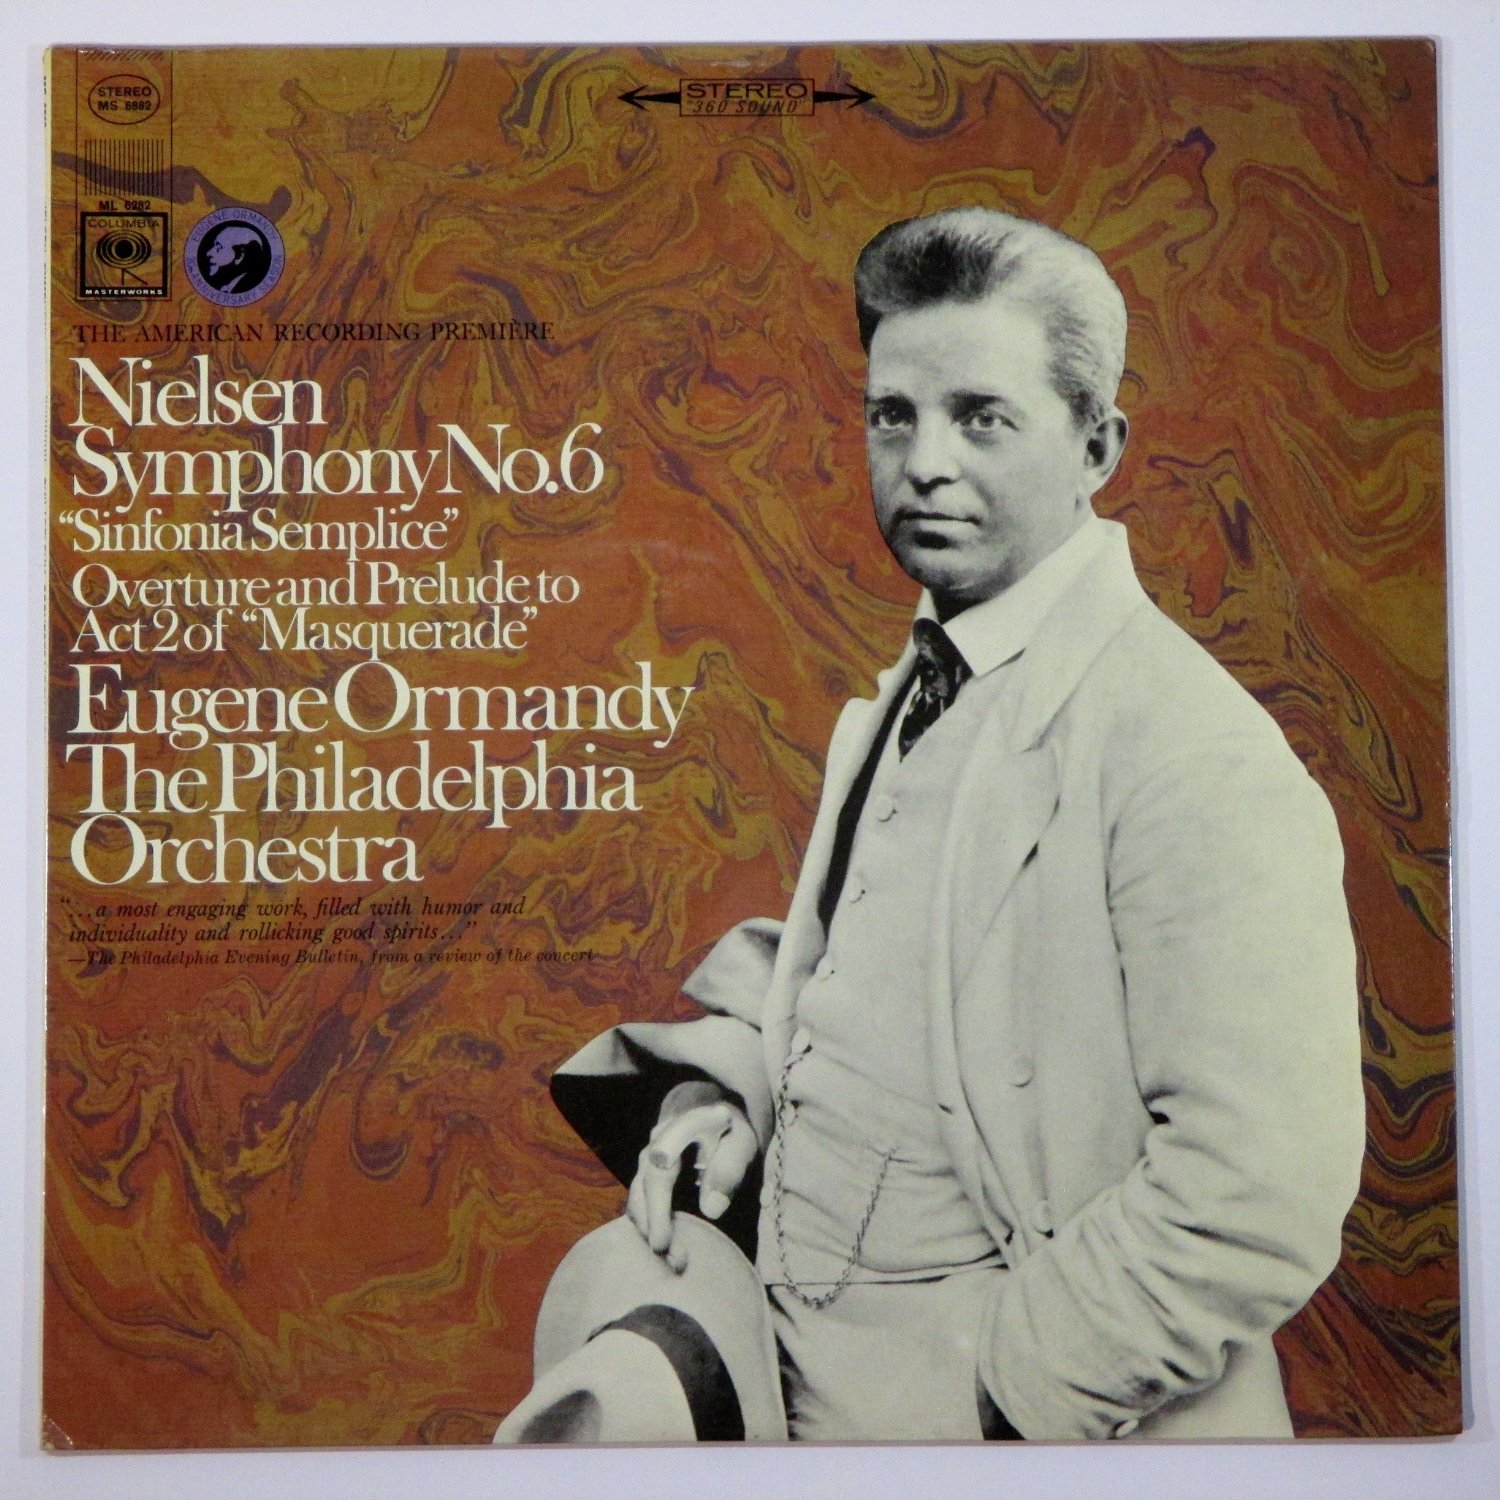 Nielsen Symphony No.6 Sinfonia Semplice Overture and Prelude to Act II of Masquerade